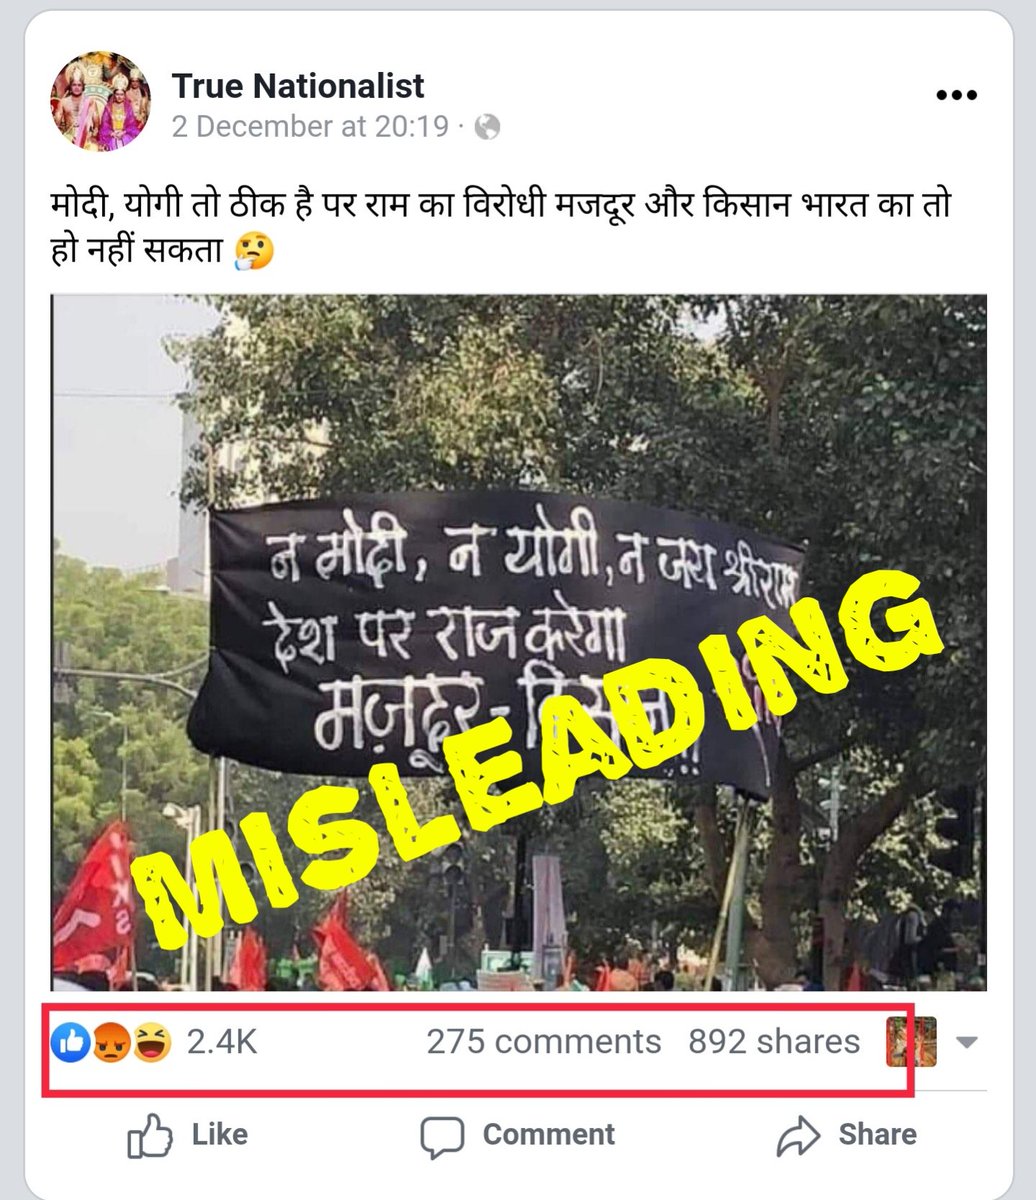 An AIKS banner from 2018 farmers' protest has been misrepresented by BJP members and supporters to suggest the recent peasant movement has 'ulterior' motives.  #AltNewsFactCheck 10/n https://www.altnews.in/banner-from-a-2018-farmers-protest-by-aiks-shared-as-recent/?utm_source=website&utm_medium=social-media&utm_campaign=newpost